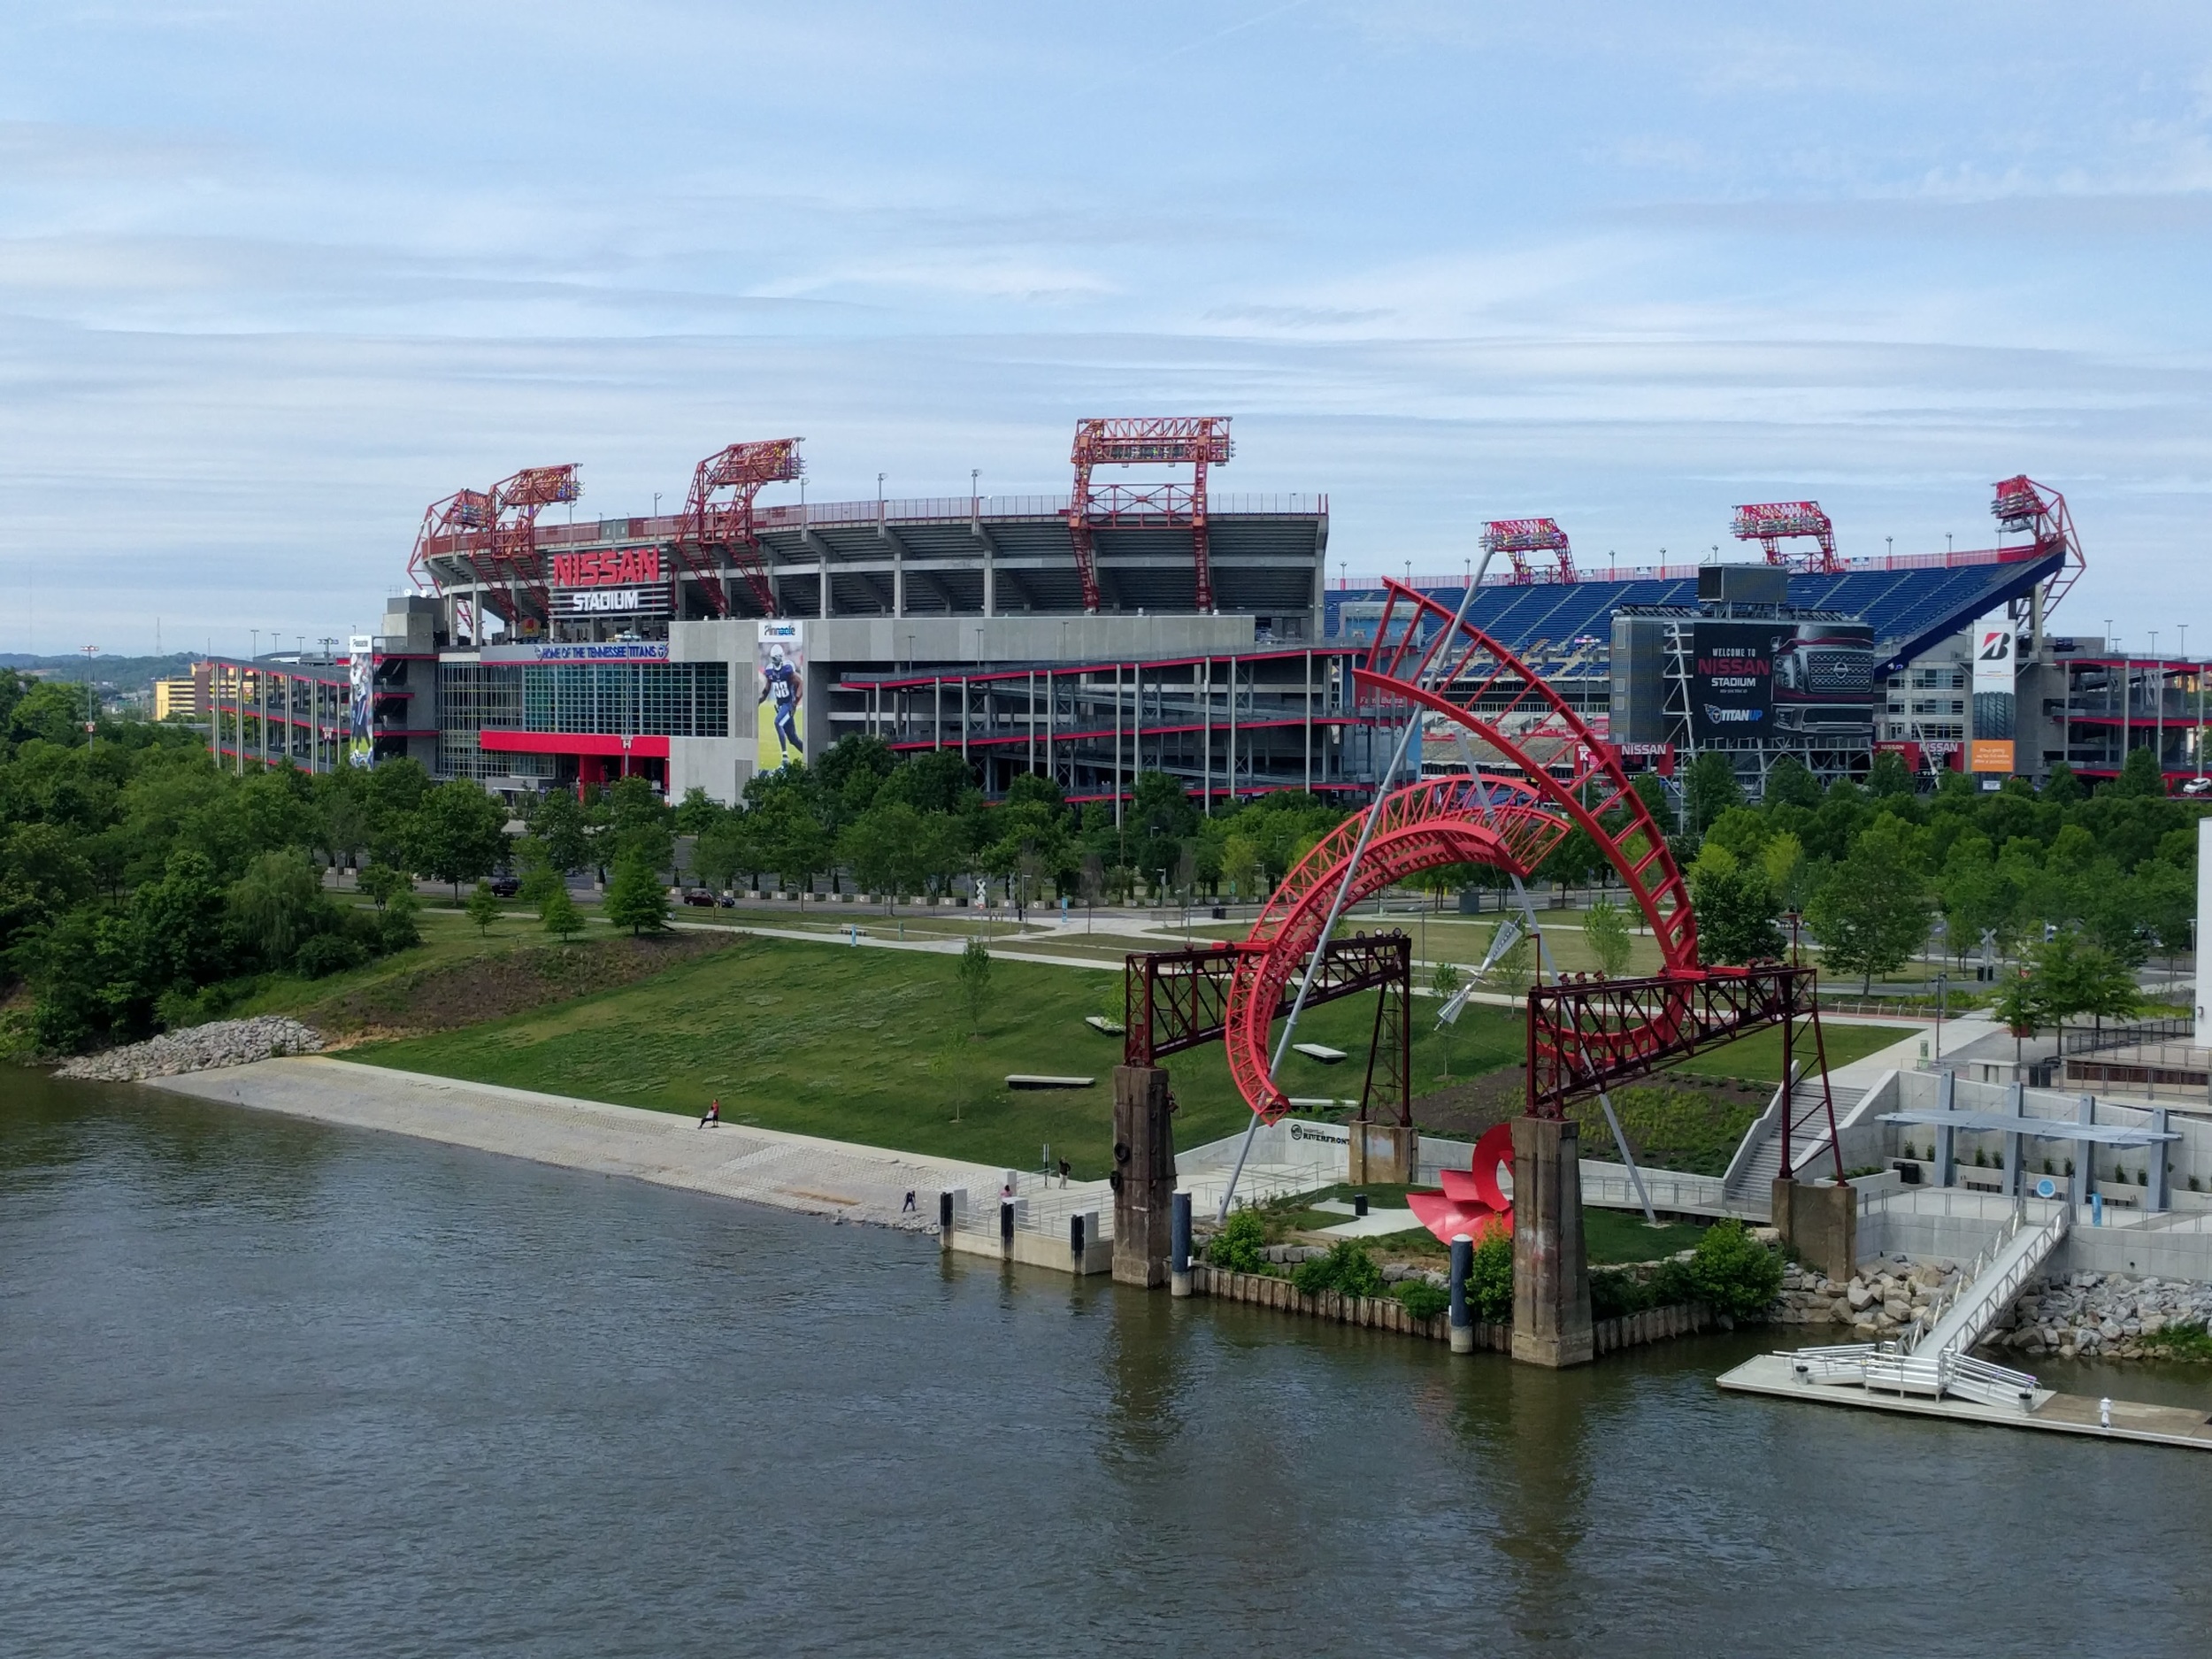  Nissan Stadium home of the Tennessee Titans 